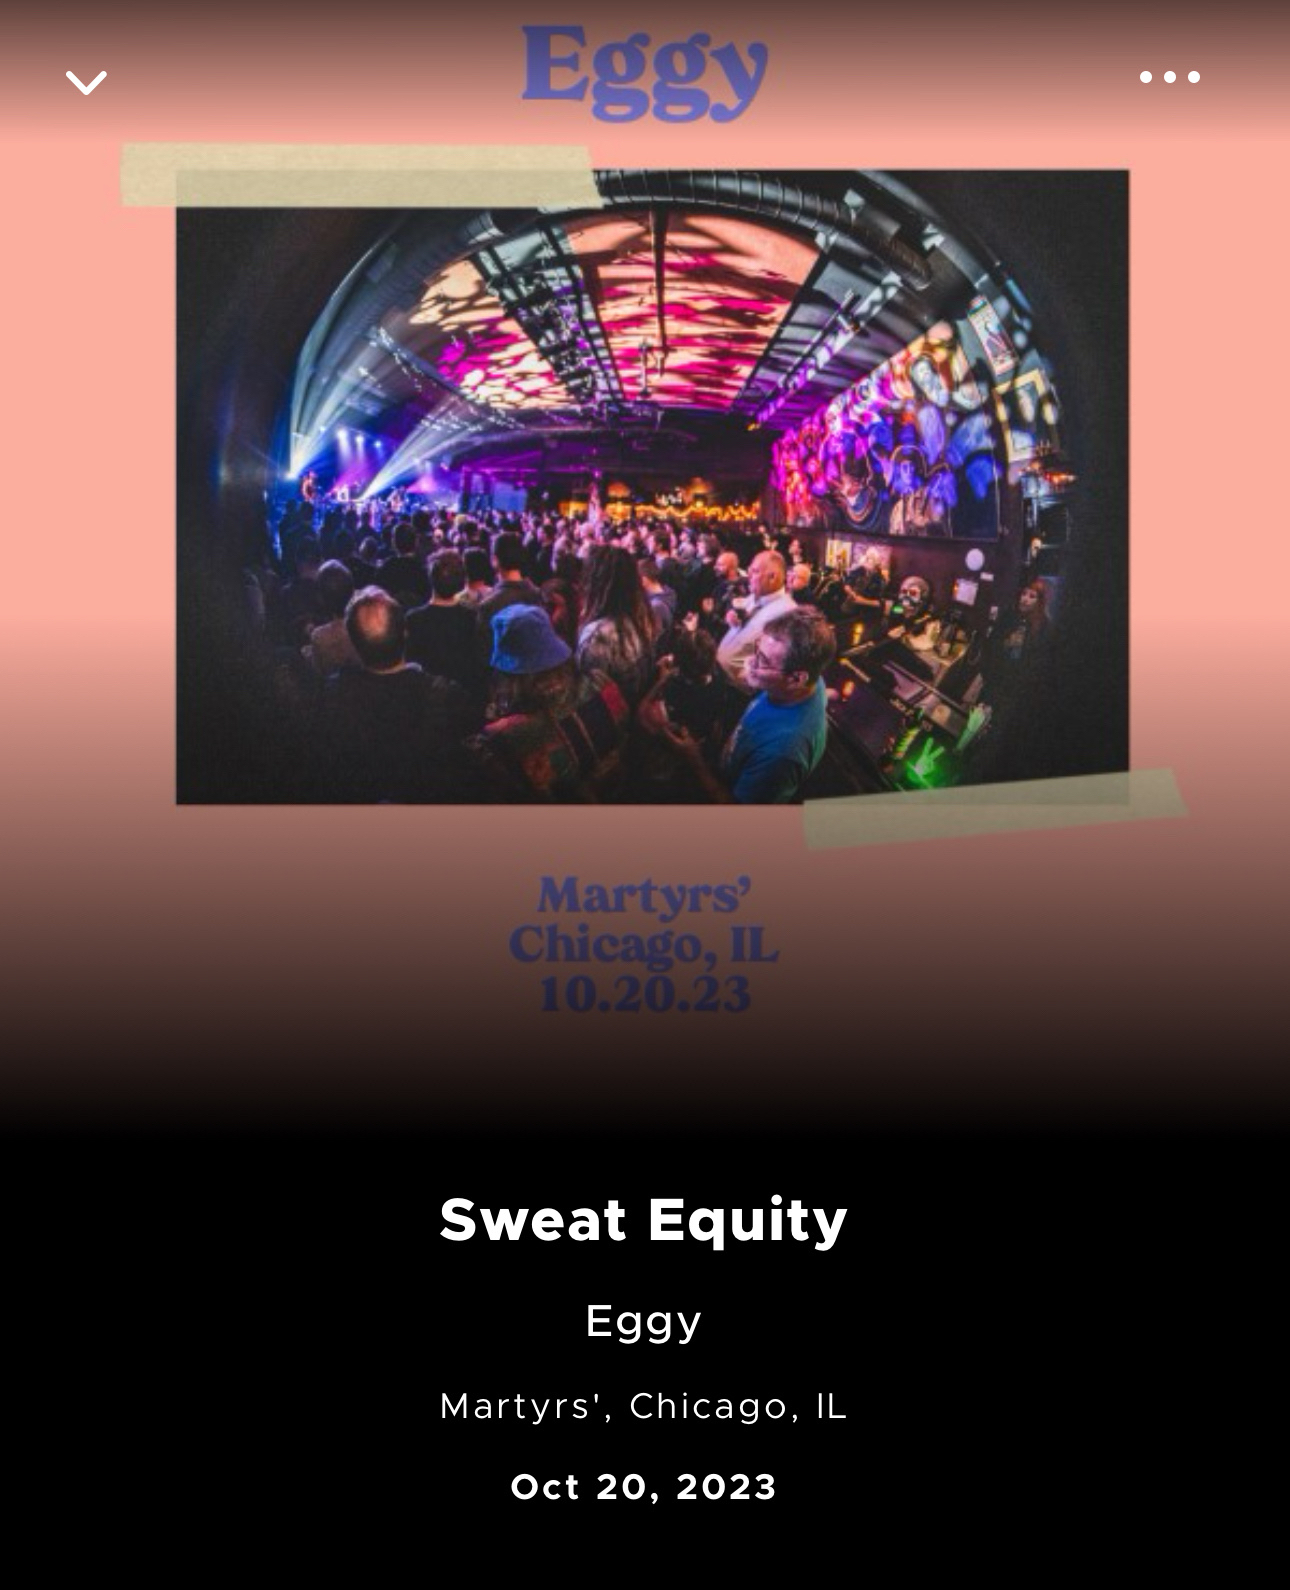 Eggy - Sweat Equity -  Oct 20, 2023 - Martyrs', Chicago, IL